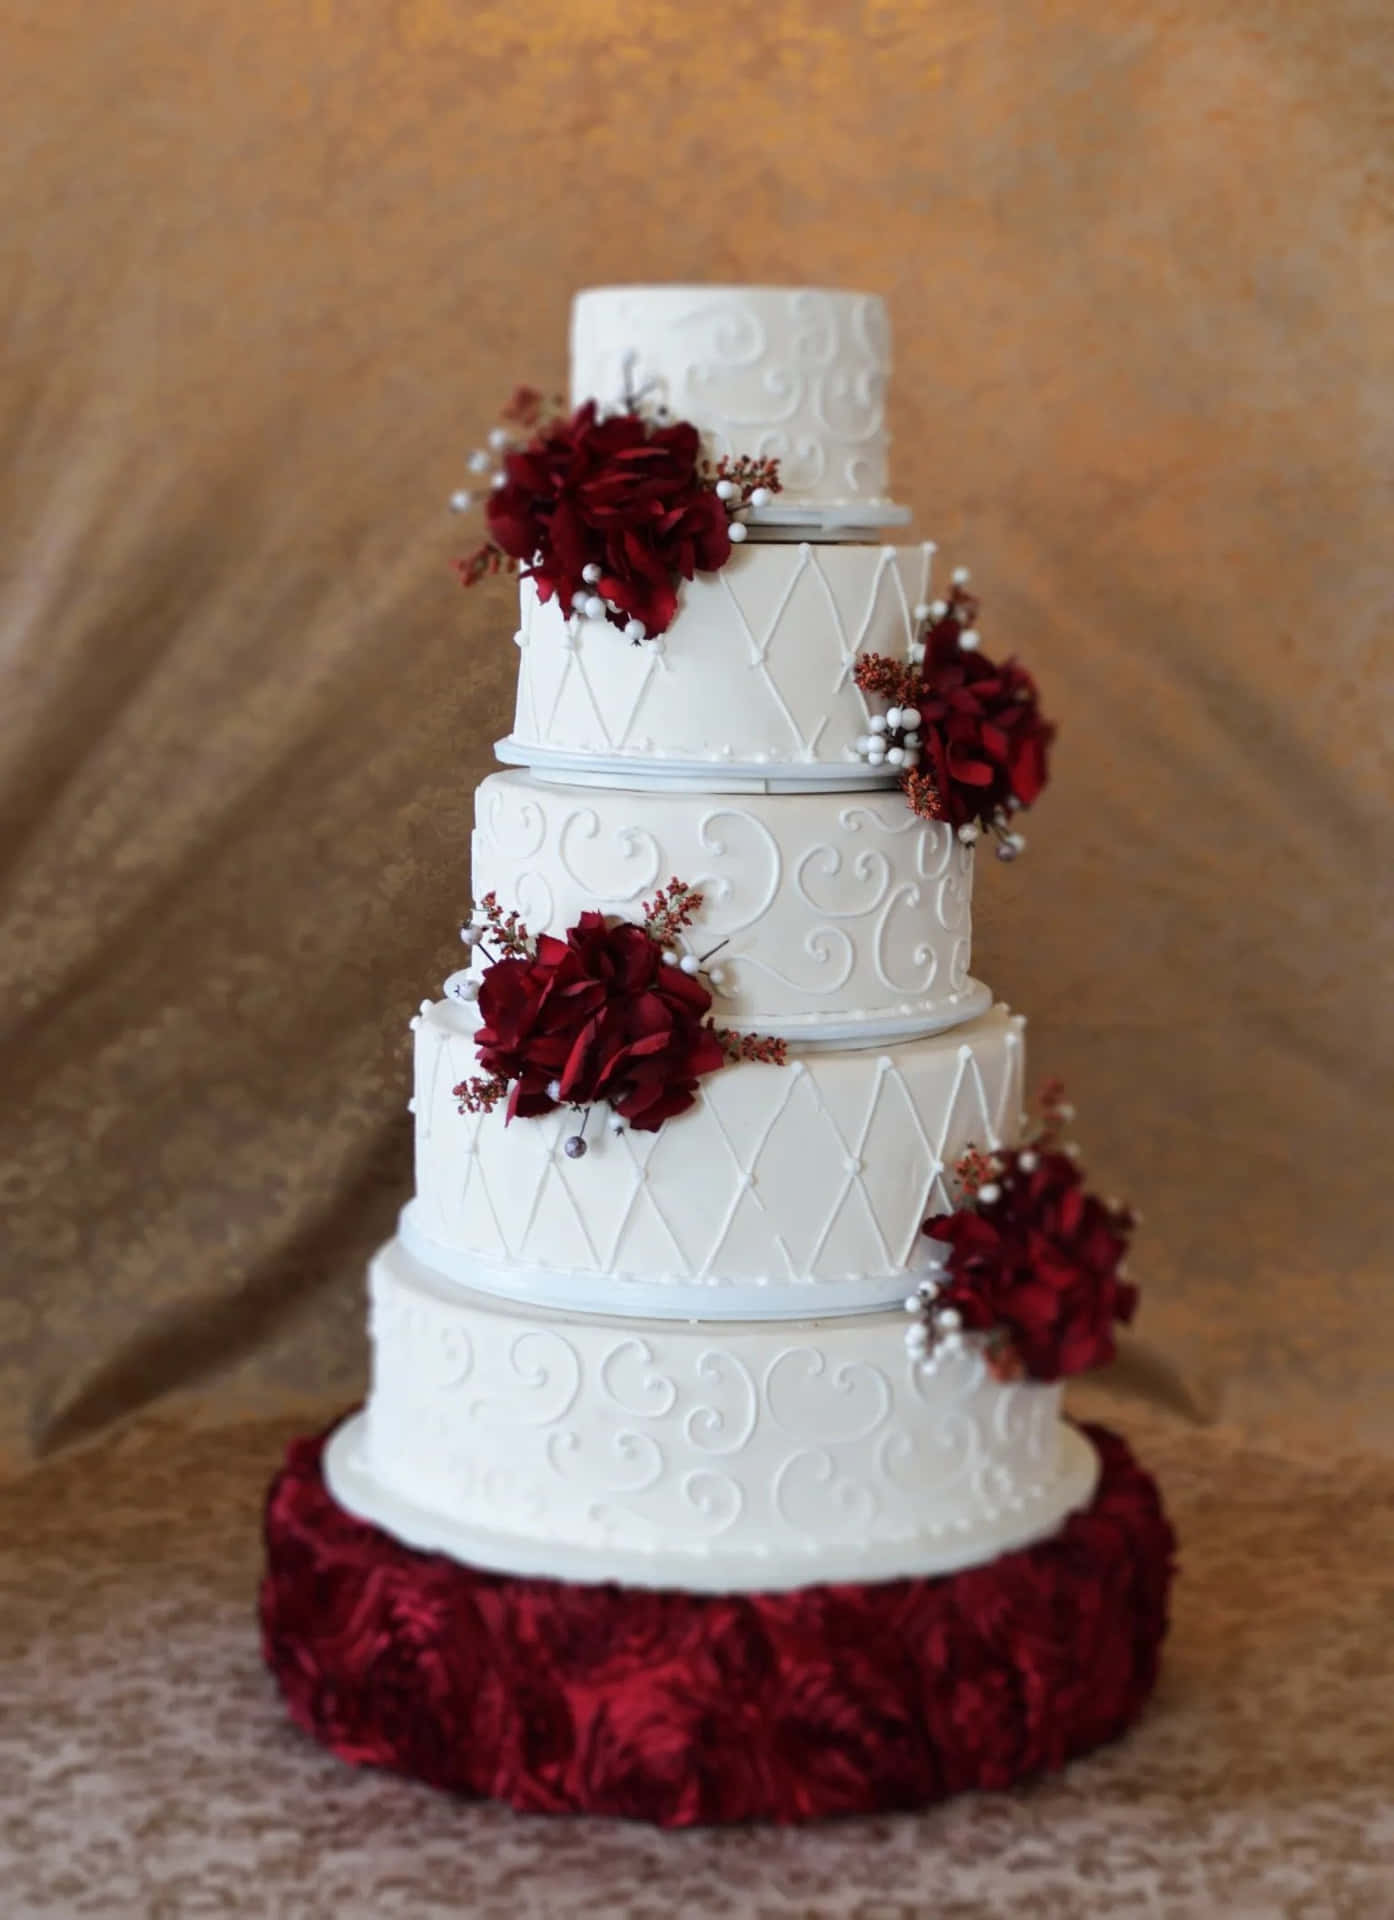 Celebrate your special day with the perfect wedding cake